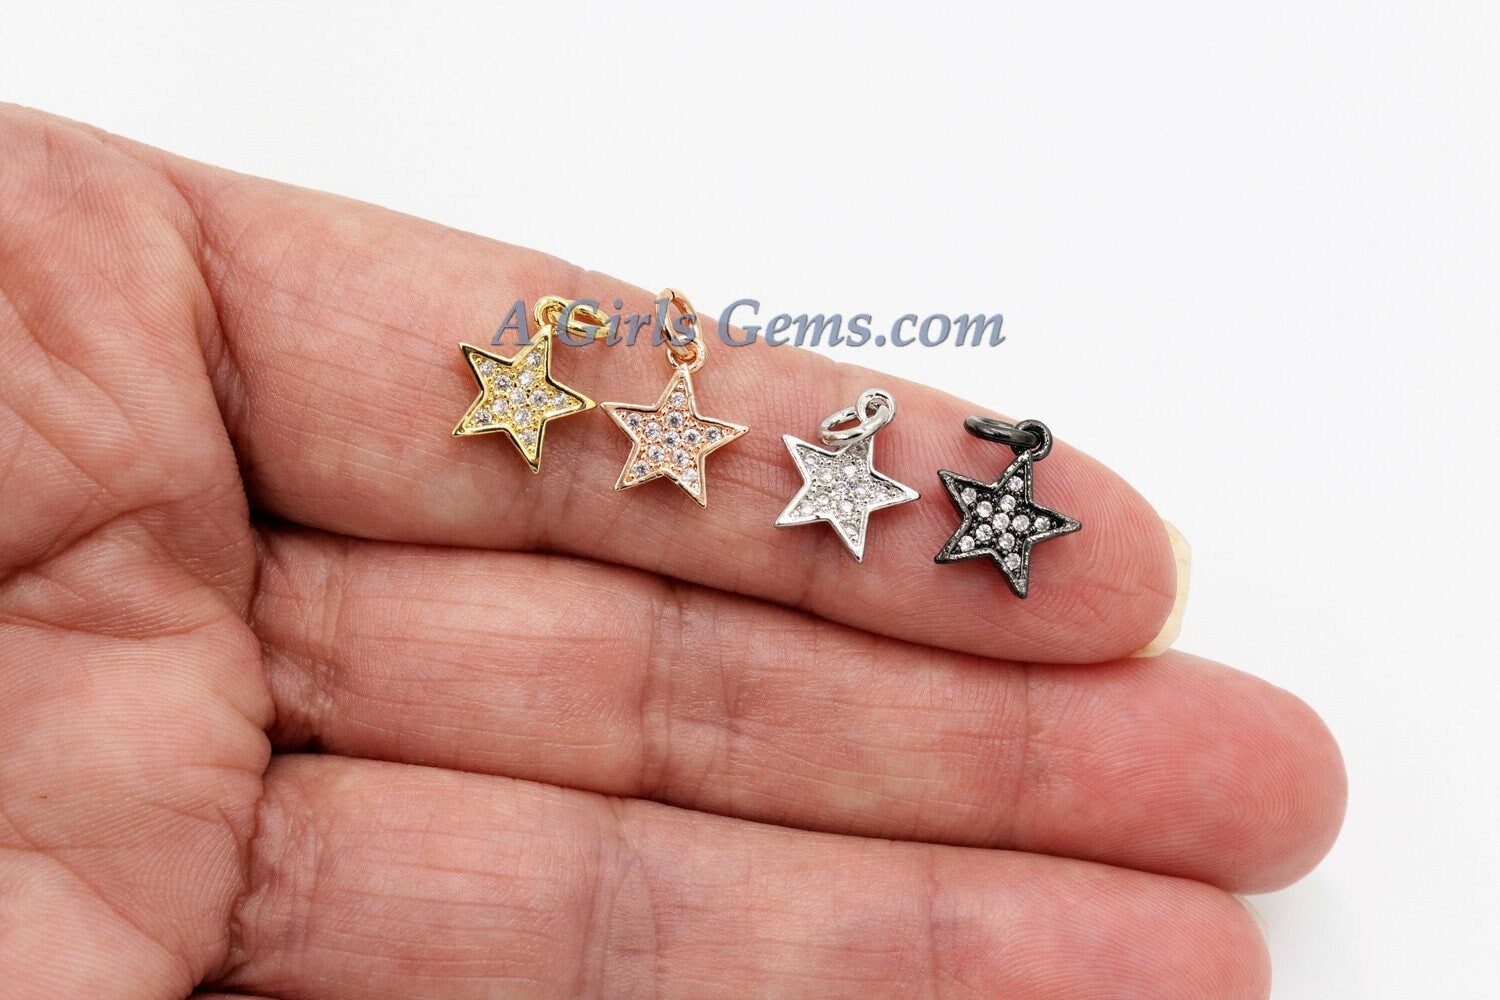 Micro Pave CZ Star Charm 3 pcs Bead Dangles, Cubic Zirconia Gold Plated Small Mini Stars AGGSM60